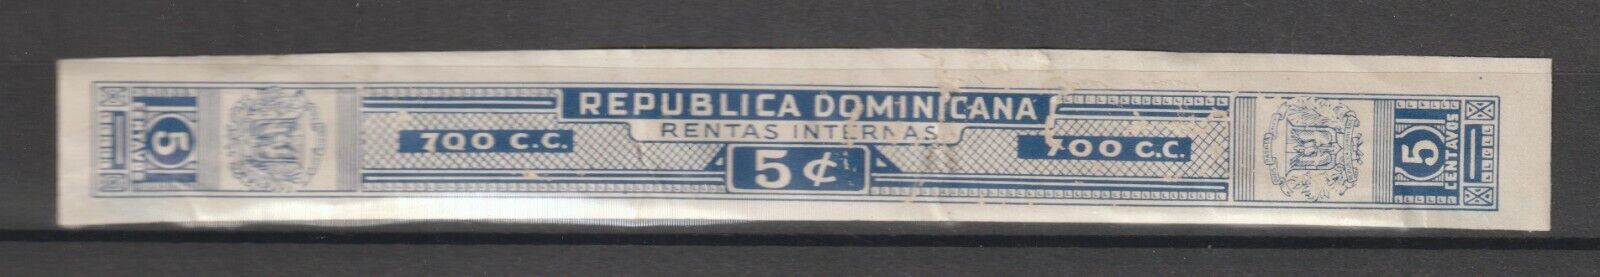 Dominicana Revenue Stamp Fiscal Timbre Fiscaux Taxpaids Alcohol Rentas Banderol